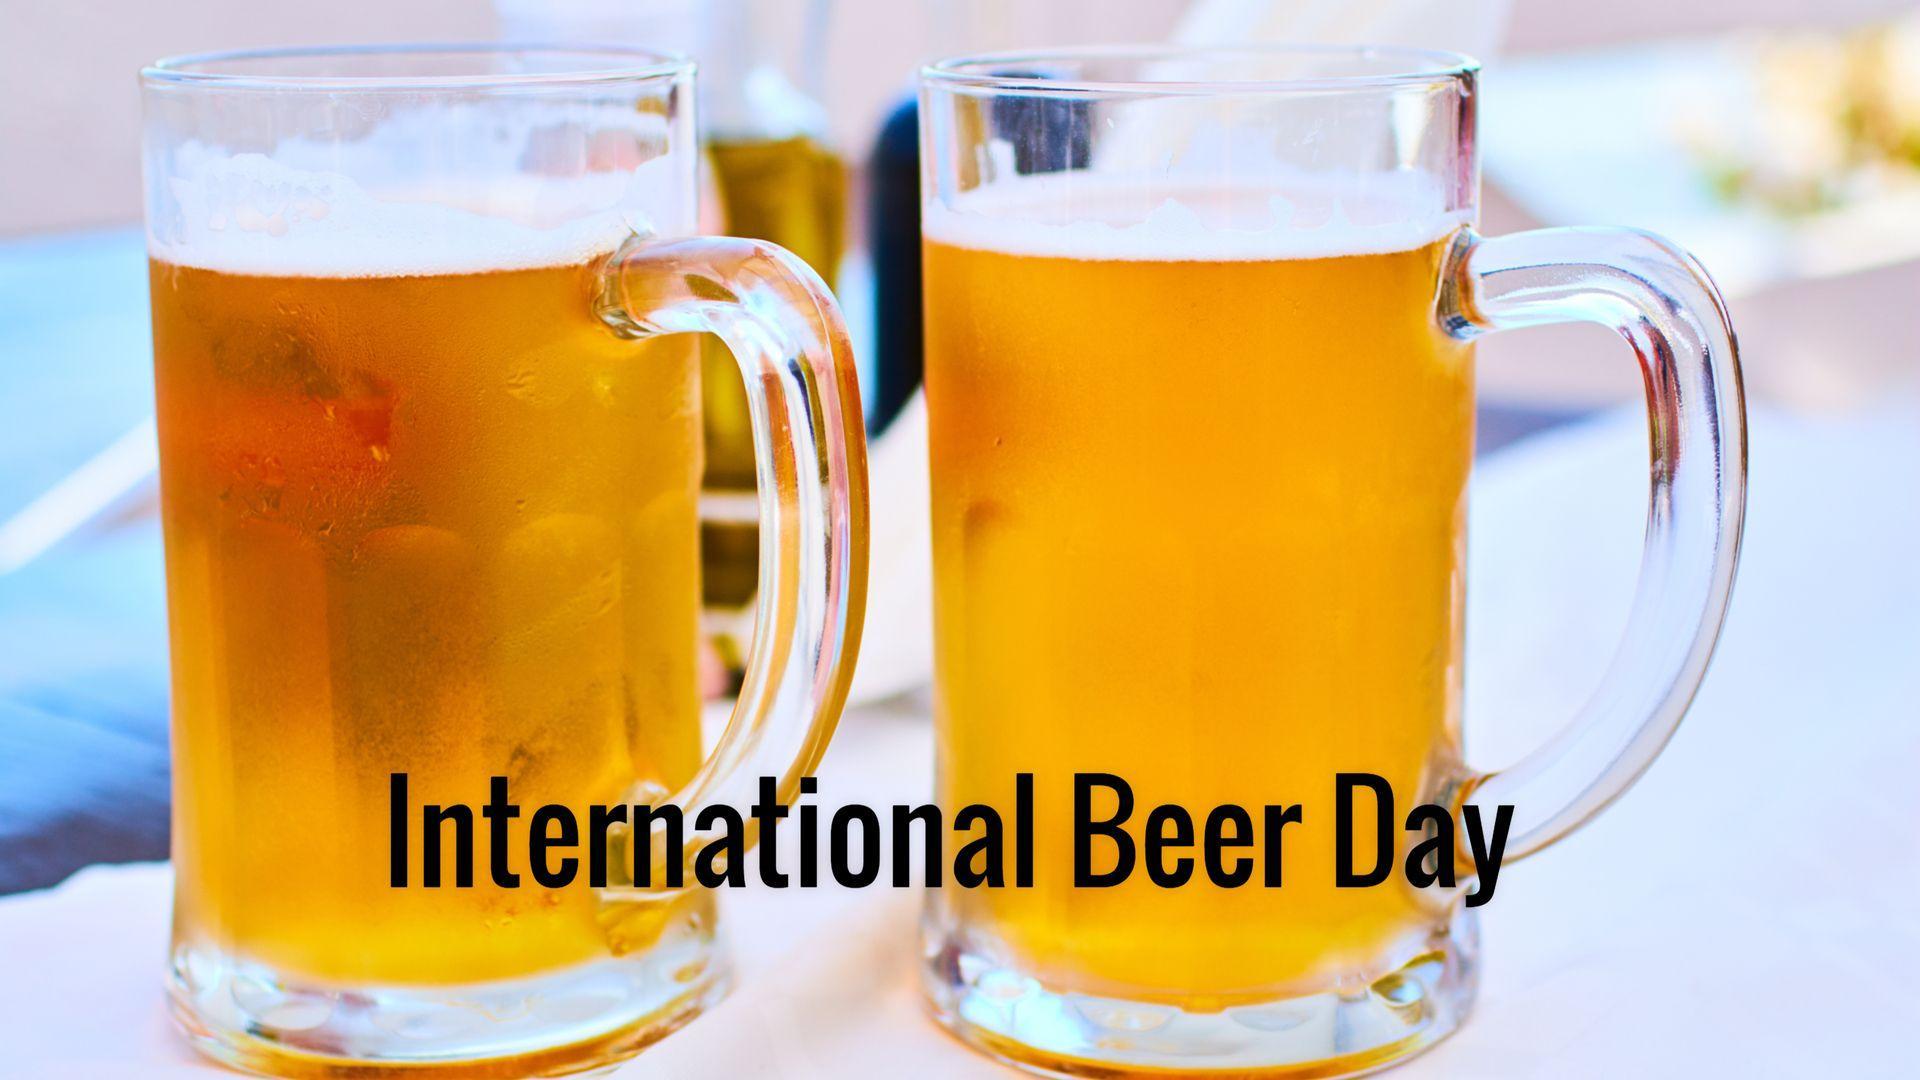 International Beer Day In 2017 2018, Where, Why, How?